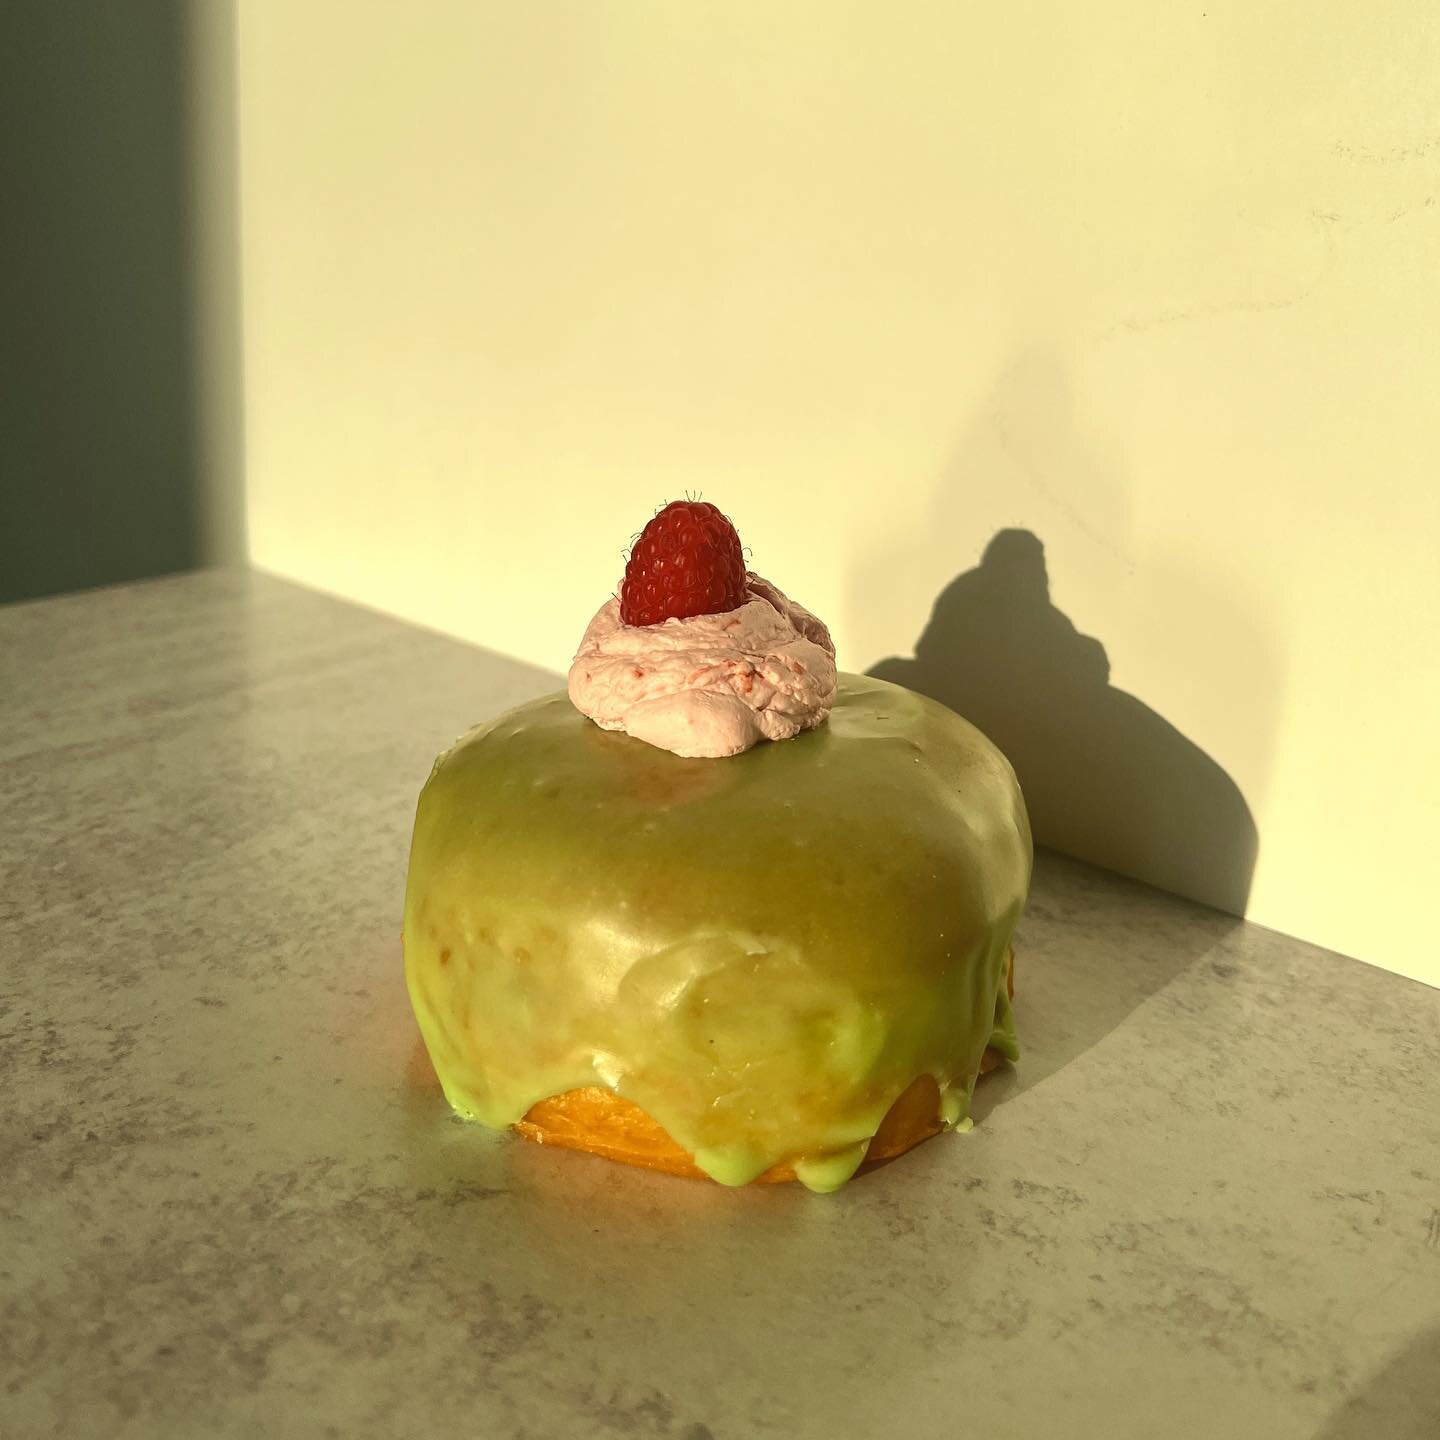 Golden hour shot of our new raspberry matcha donut - filled w/ raspberry jelly &amp; matcha pastry cream. Available today &amp; all throughout July!